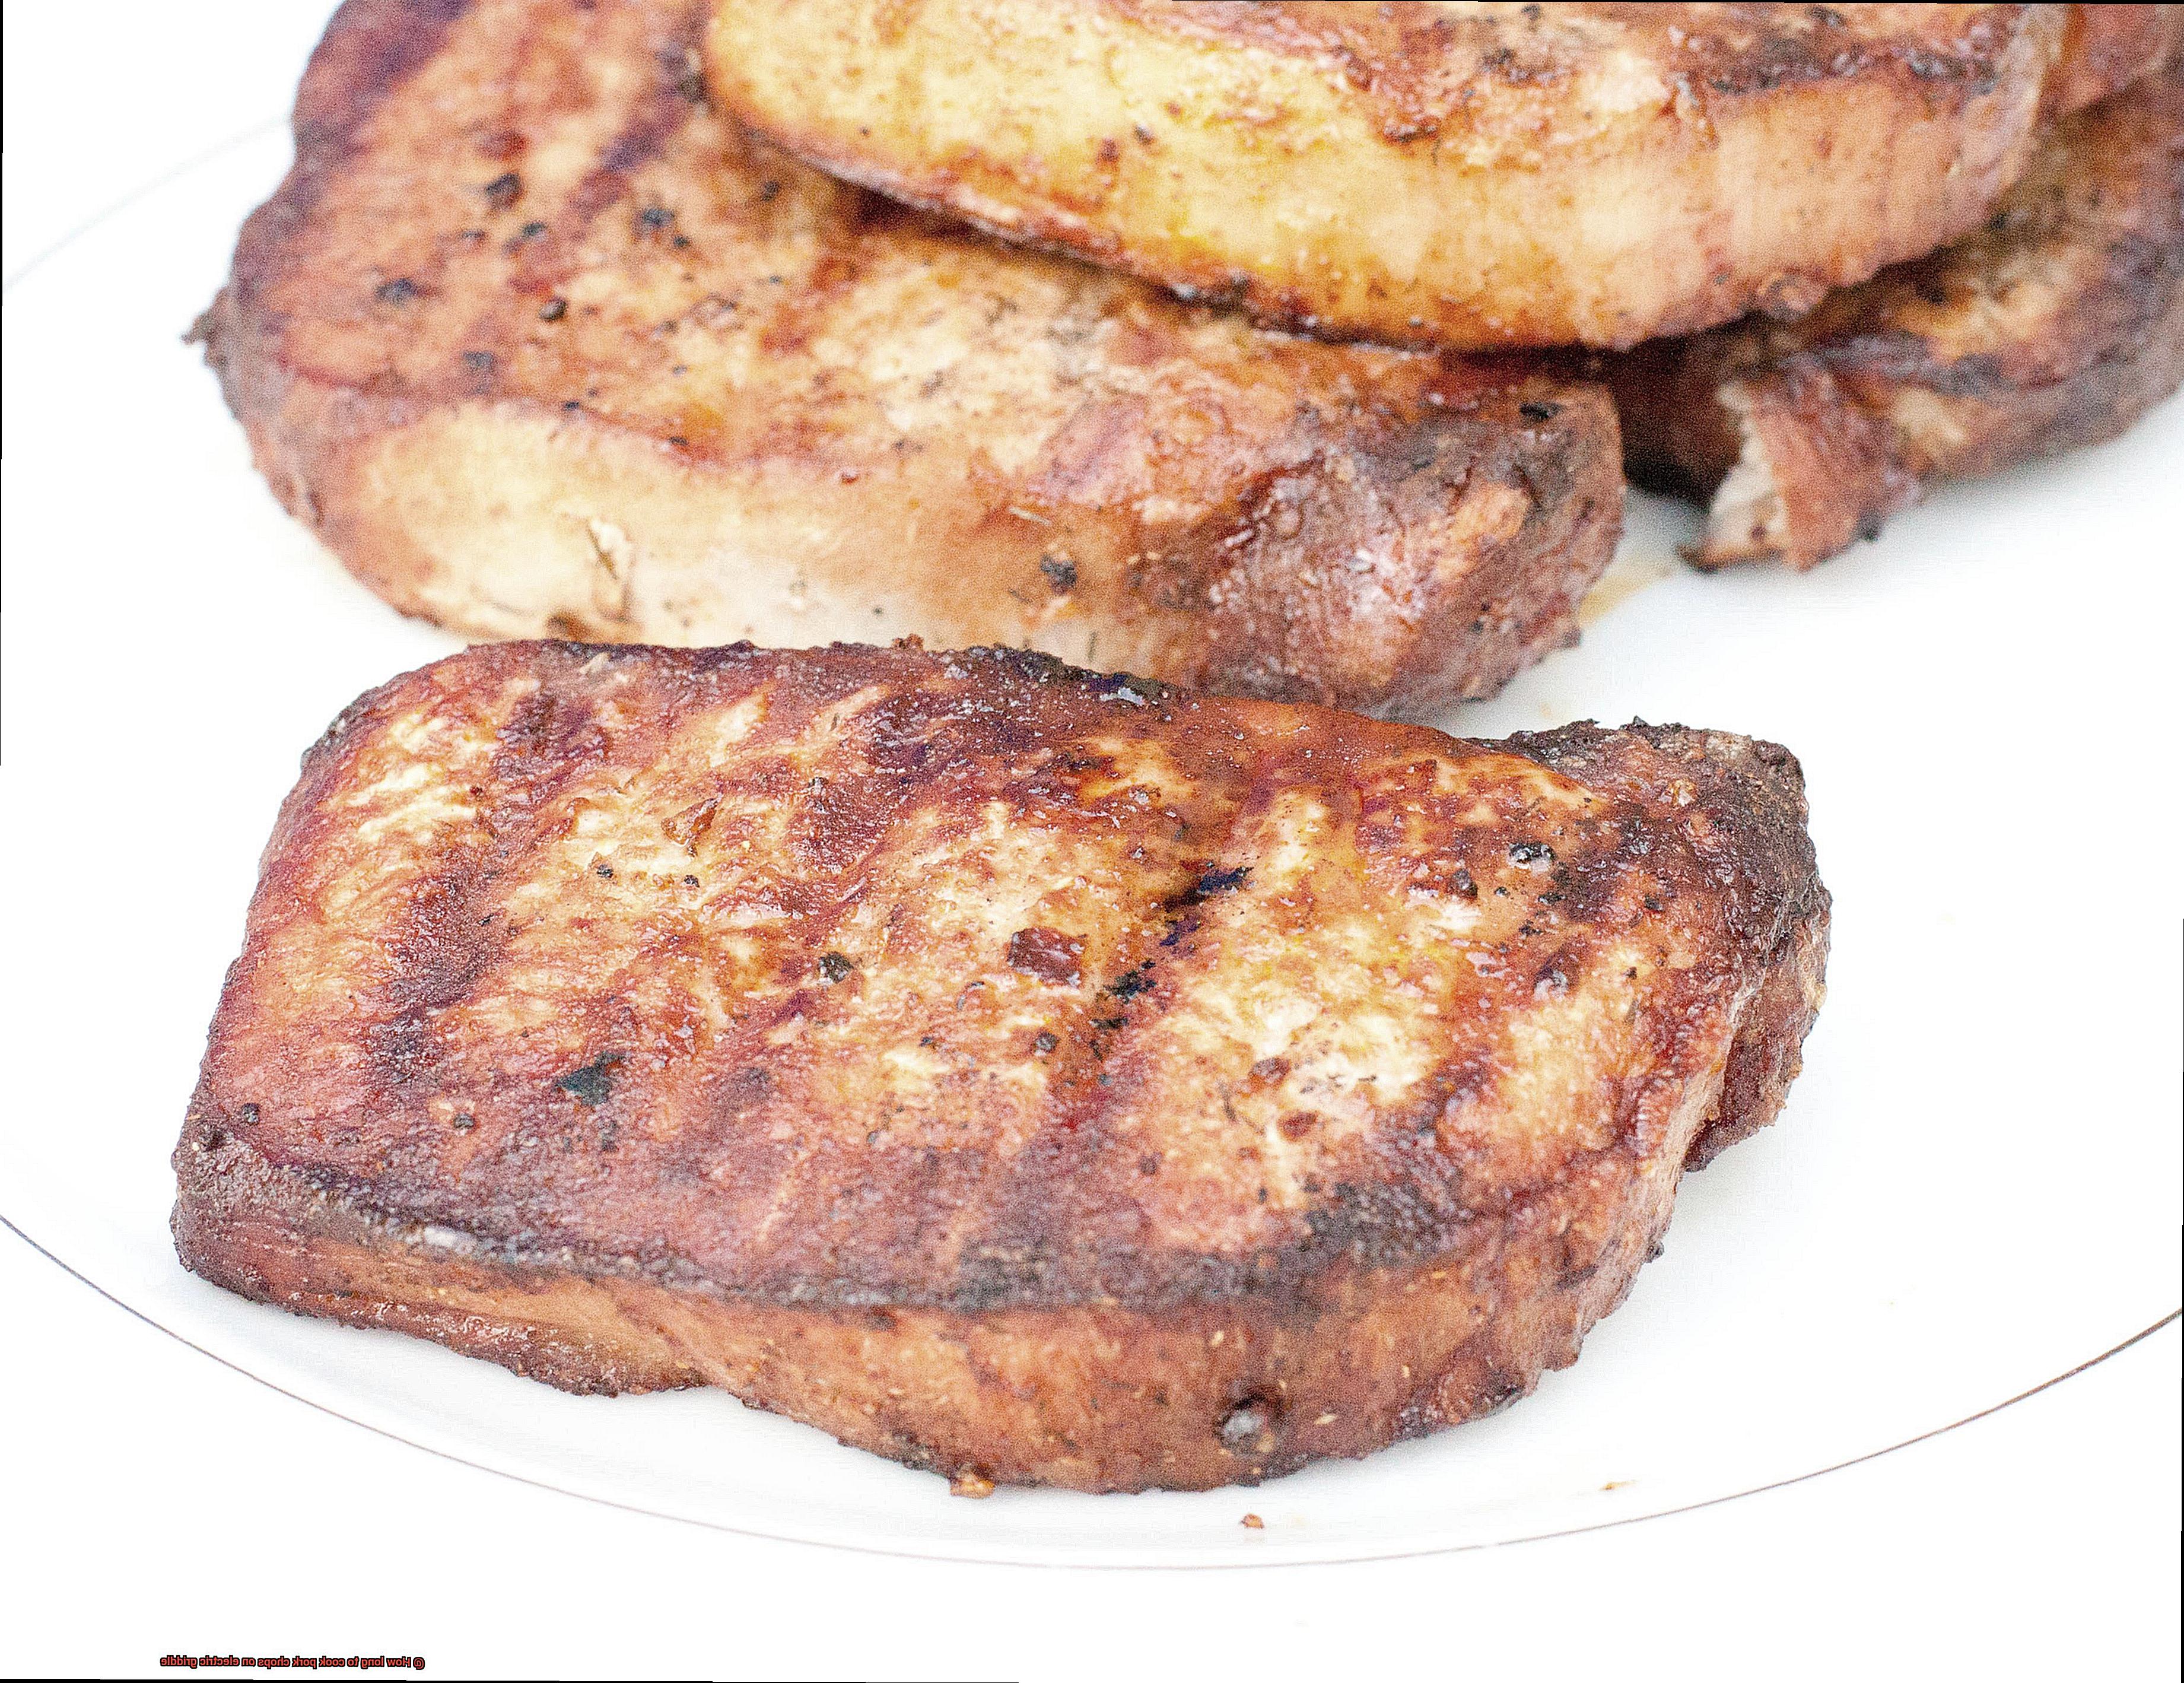 How long to cook pork chops on electric griddle-4